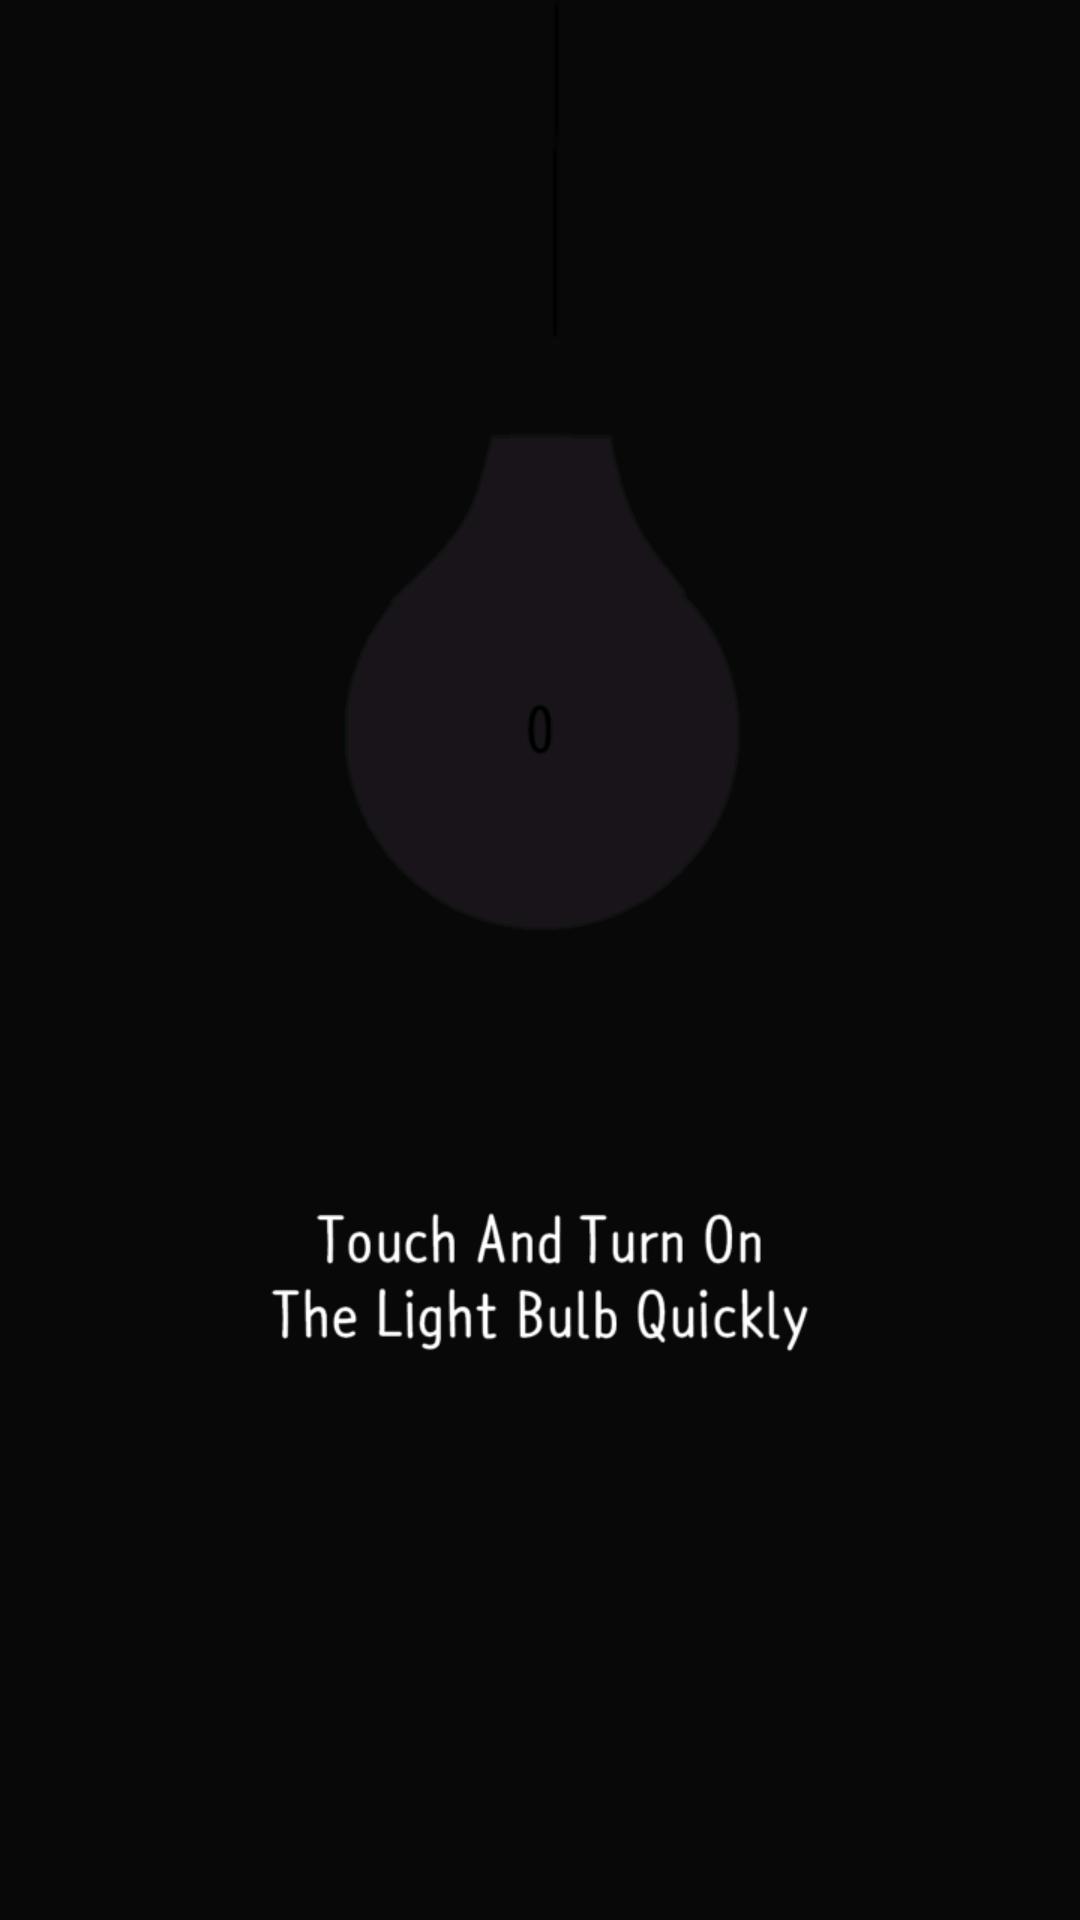 Horror Turn On The Light Bulb For Android Apk Download - roblox light bulb horror game